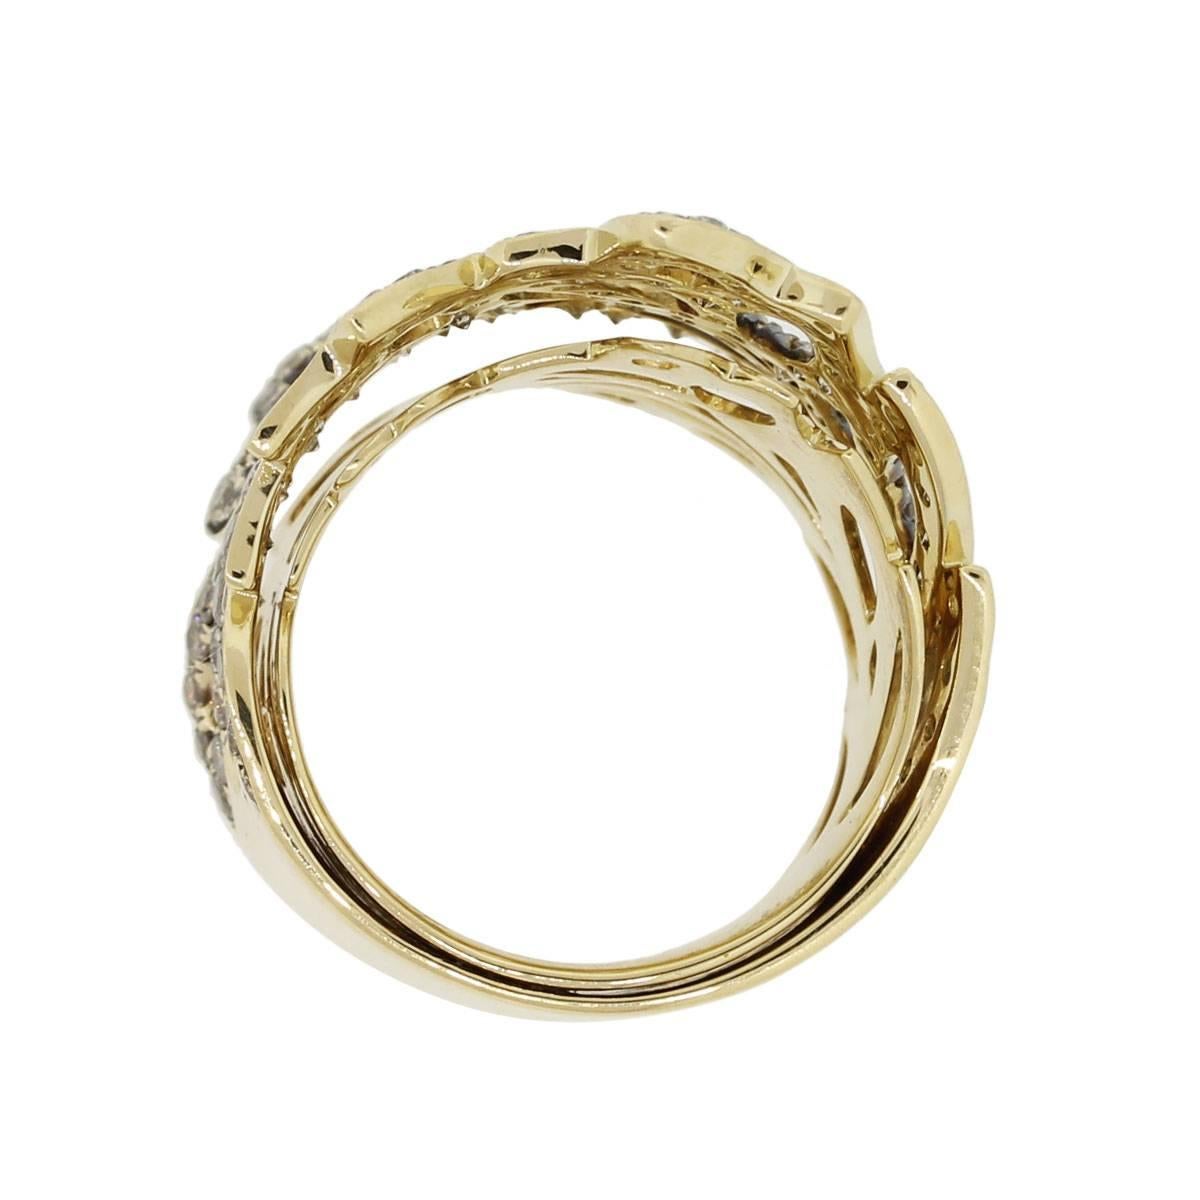 Material: 18k yellow gold
Diamond Details: Approximately 3.22ctw of round brilliant diamonds. Diamonds are champagne in color and SI in clarity
Ring Measurements: 0.86″ x 1″ x 0.86″
Ring Size: 7.50
Total Weight: 15.8g (10.2dwt)
SKU: A30311579